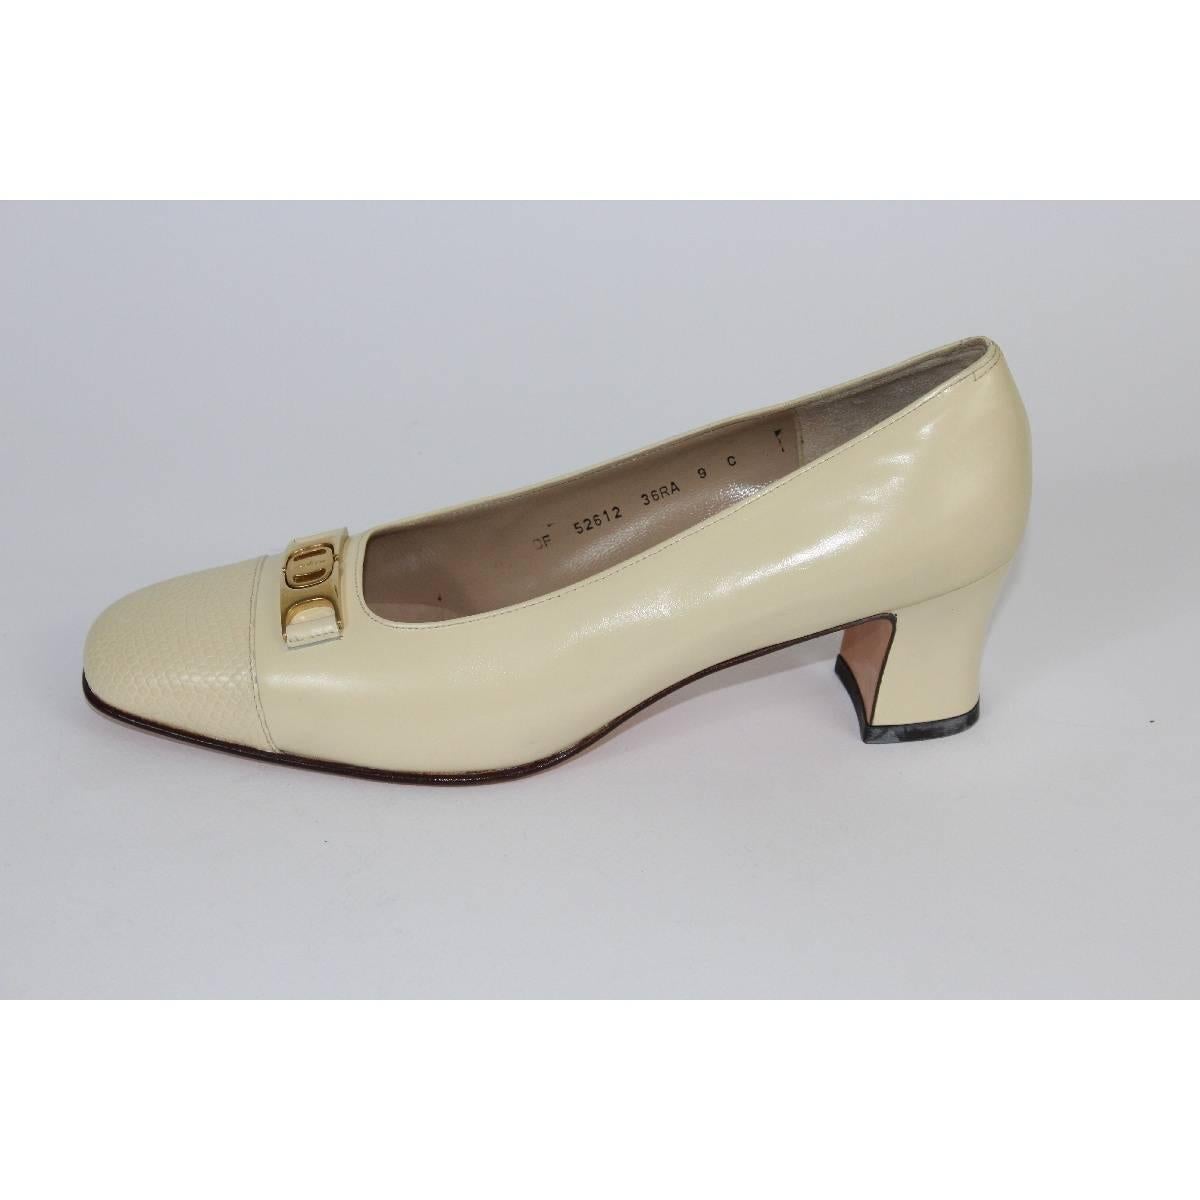 Salvatore Ferragamo ivory leather new women's shoes, small heel of 6 cm, golden clasp with logo, coconut print shoe tip, new shoes never used, label on the sole.

Size 9 (Us) 39 (it) 6 (uk)

Heel height: 6 cm
Code: DF 52612 36 RA 9 C

Composition: